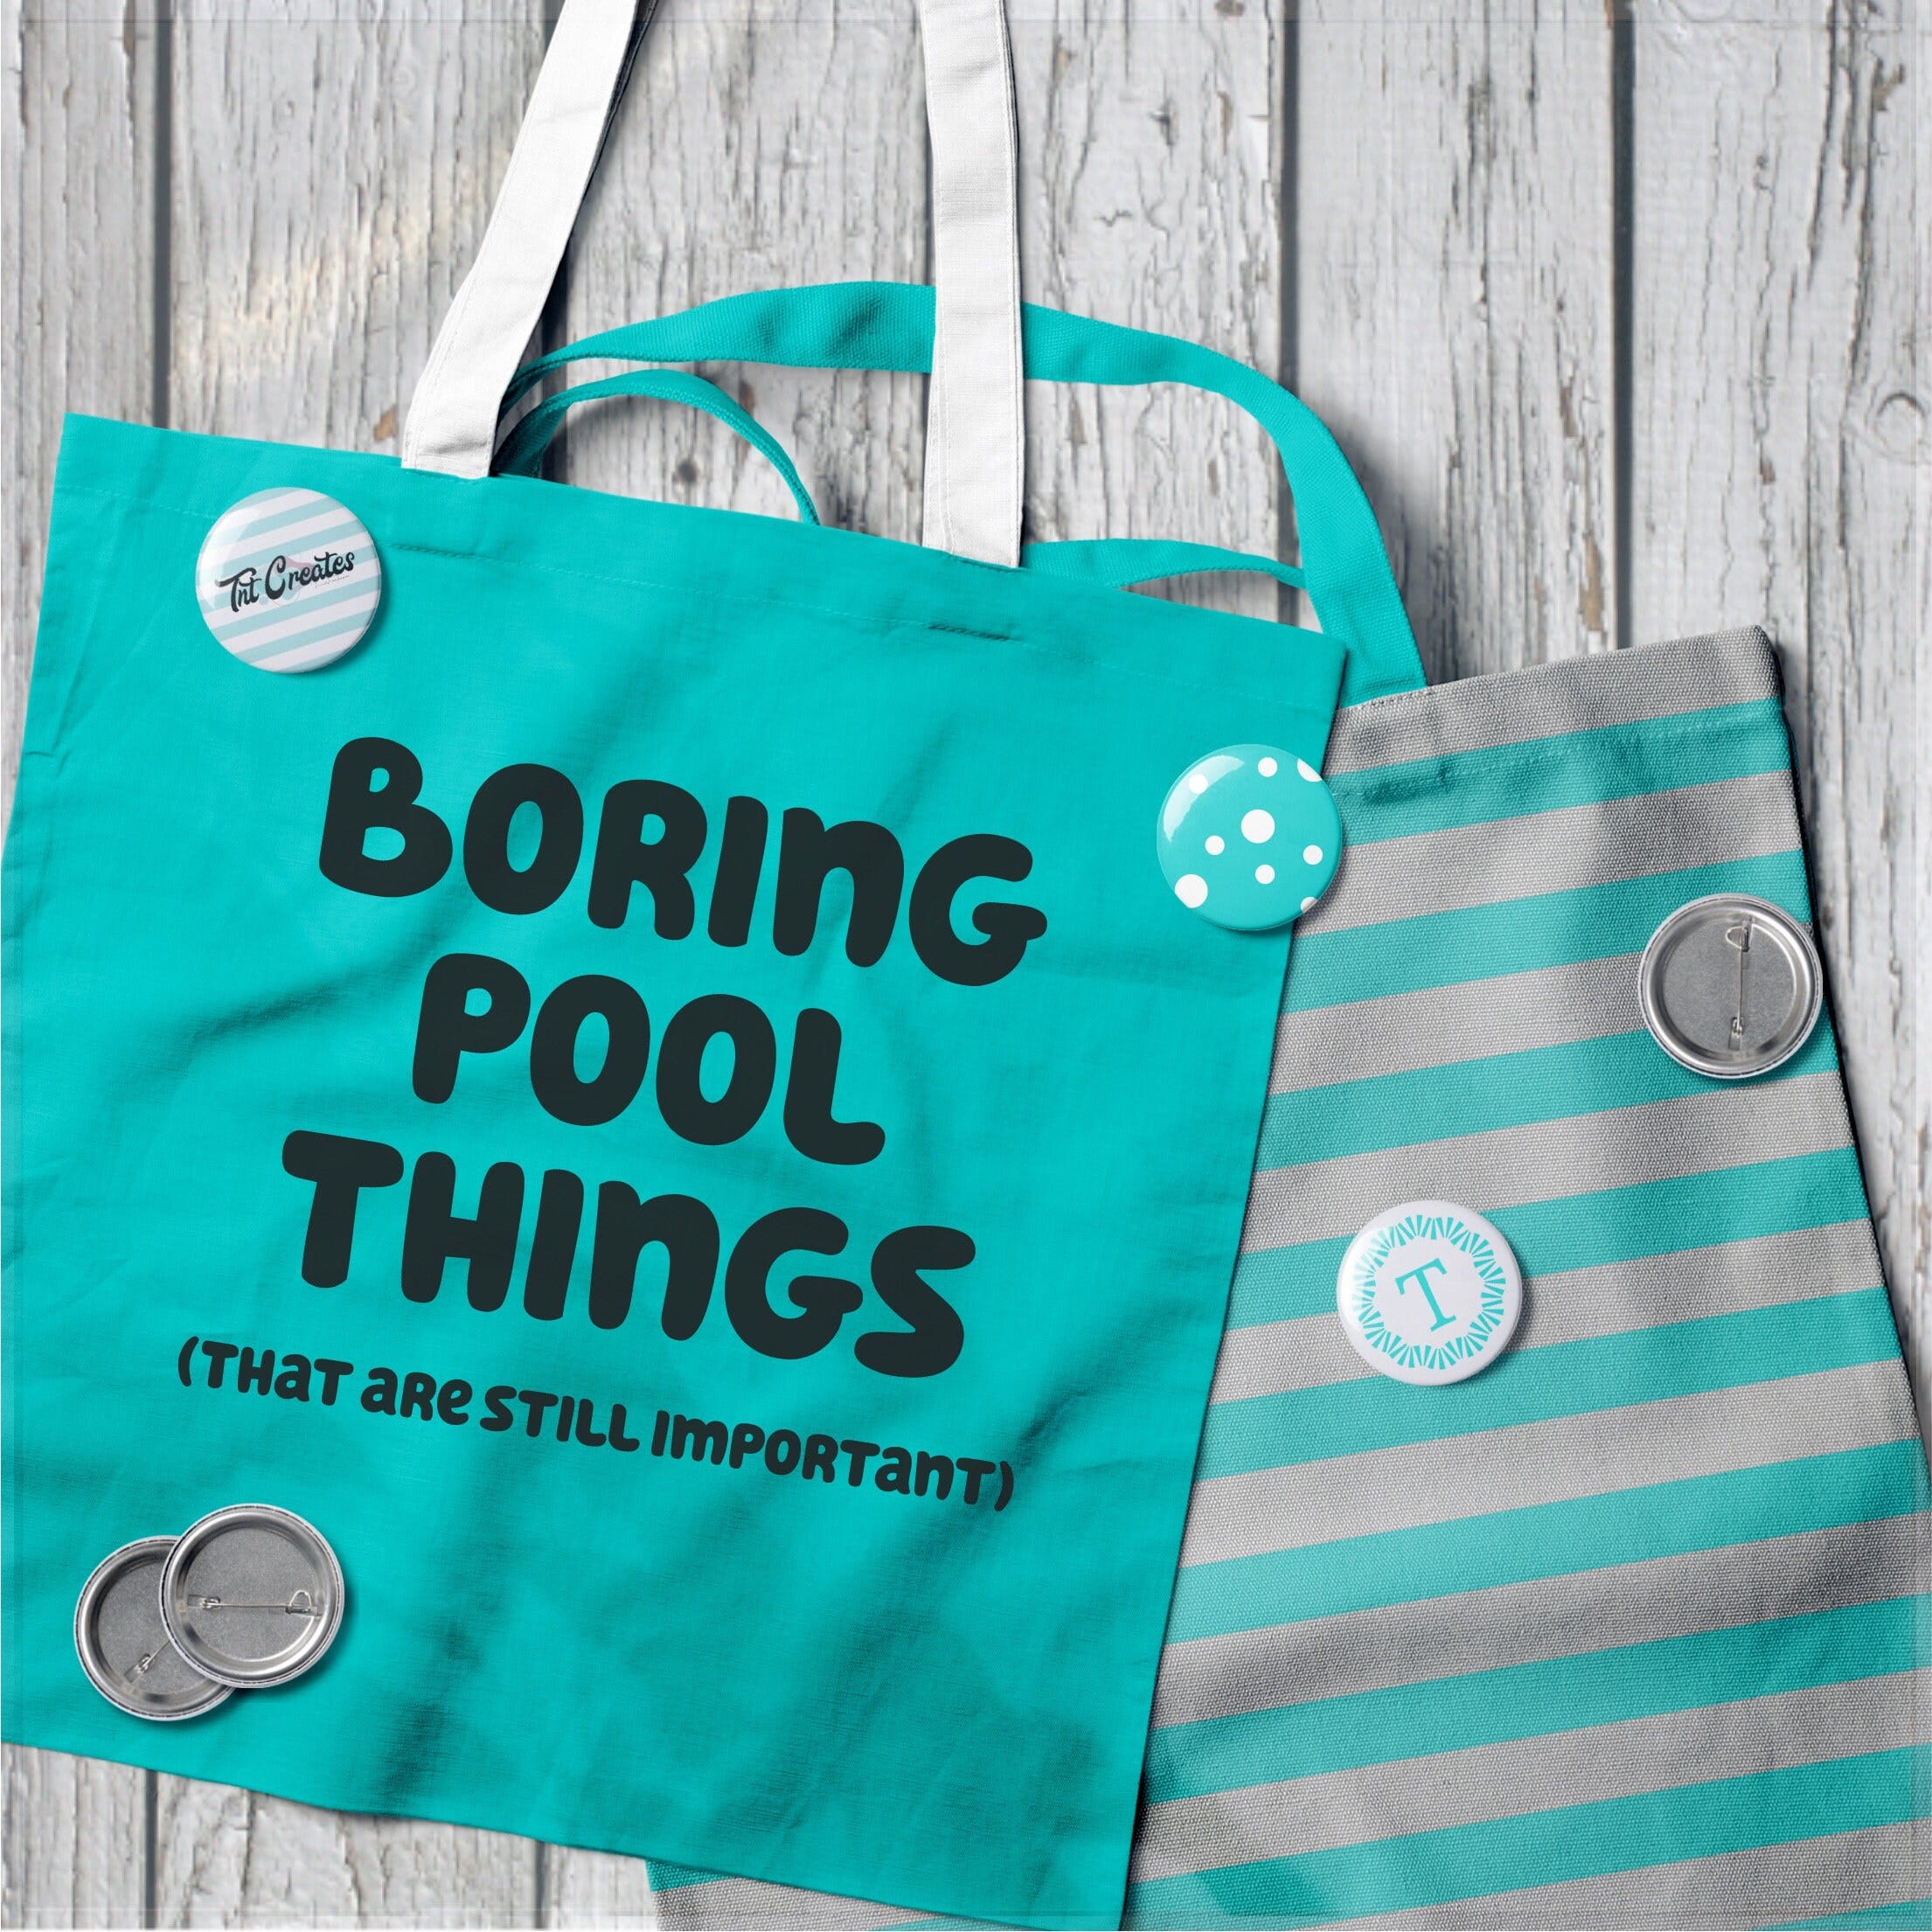 Boring Pool Things (That are Still Important) SVG, Tote Bag SVG, Saying SVG, Cut File for Cricut, Silhouette and Lasers- svg, png, esp, dxf